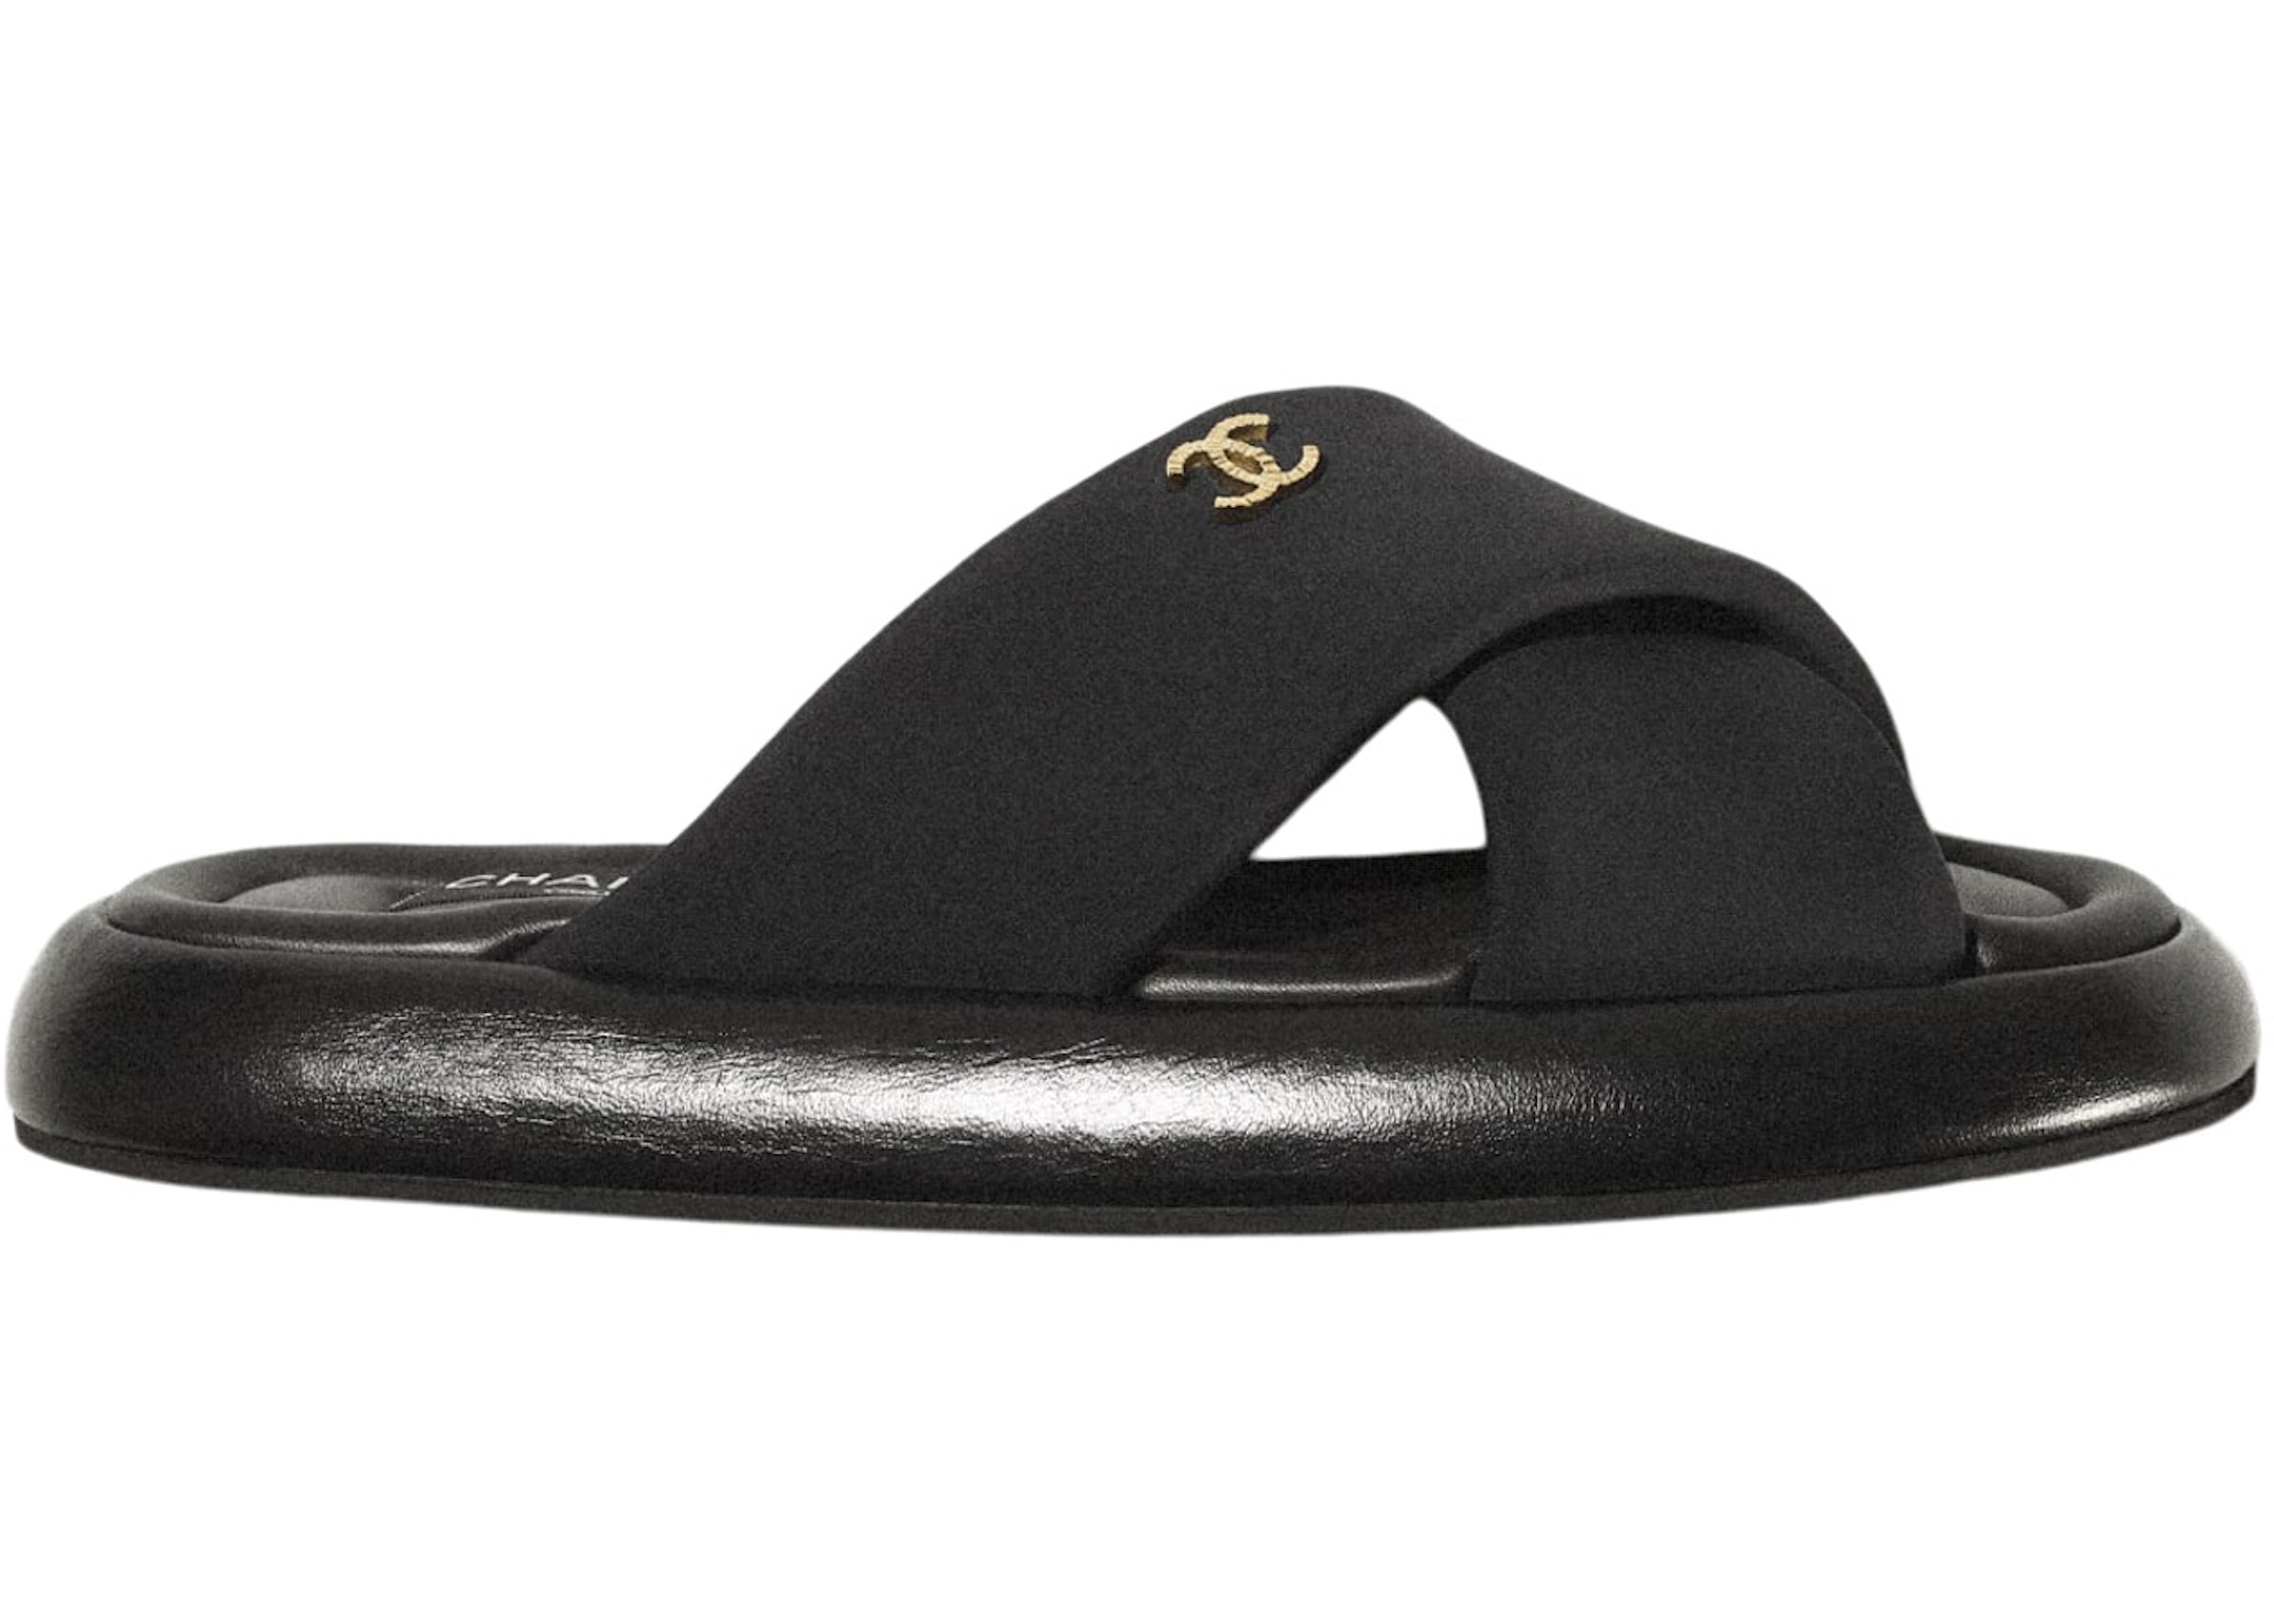 Buy Chanel Slides & Sandals Shoes & New Sneakers - StockX